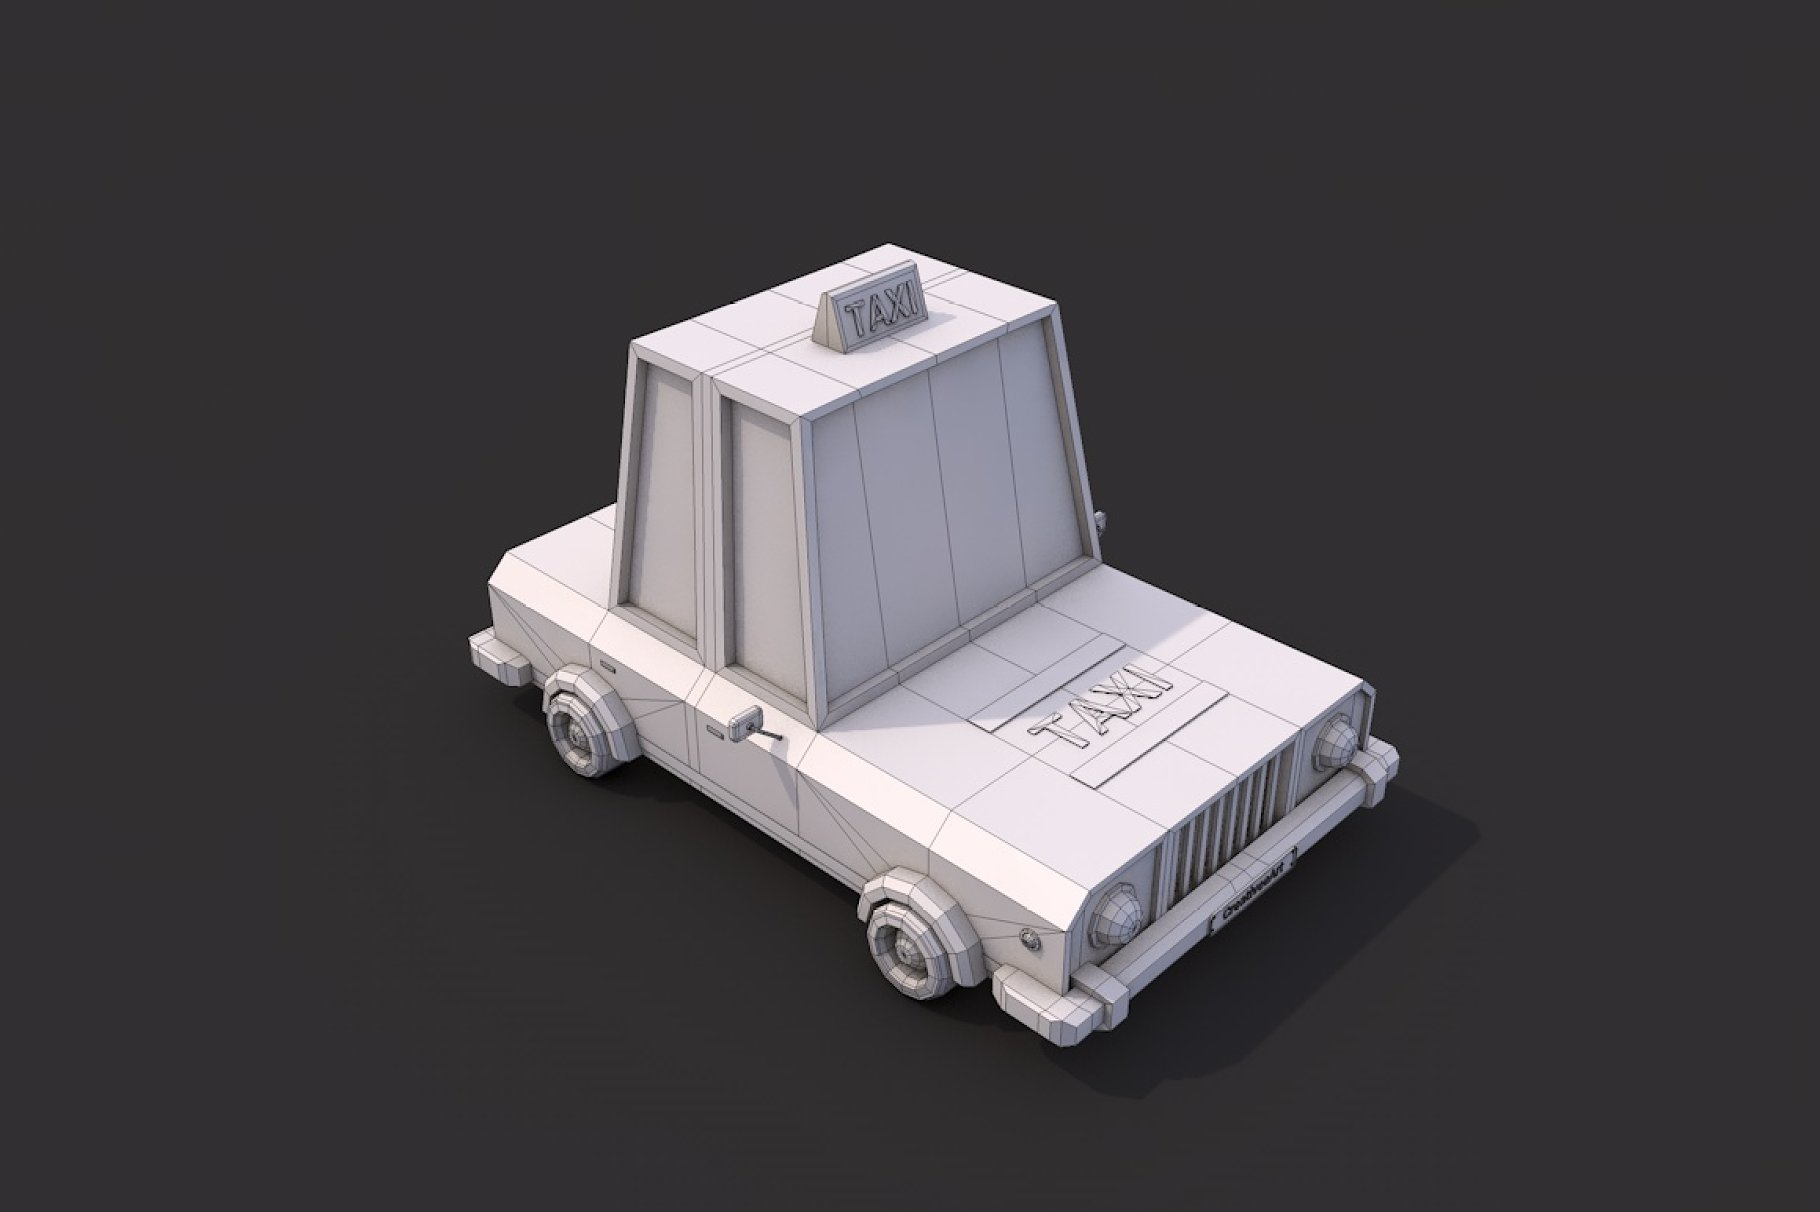 Low poly taxi car front right graphic mockup on a dark gray background.